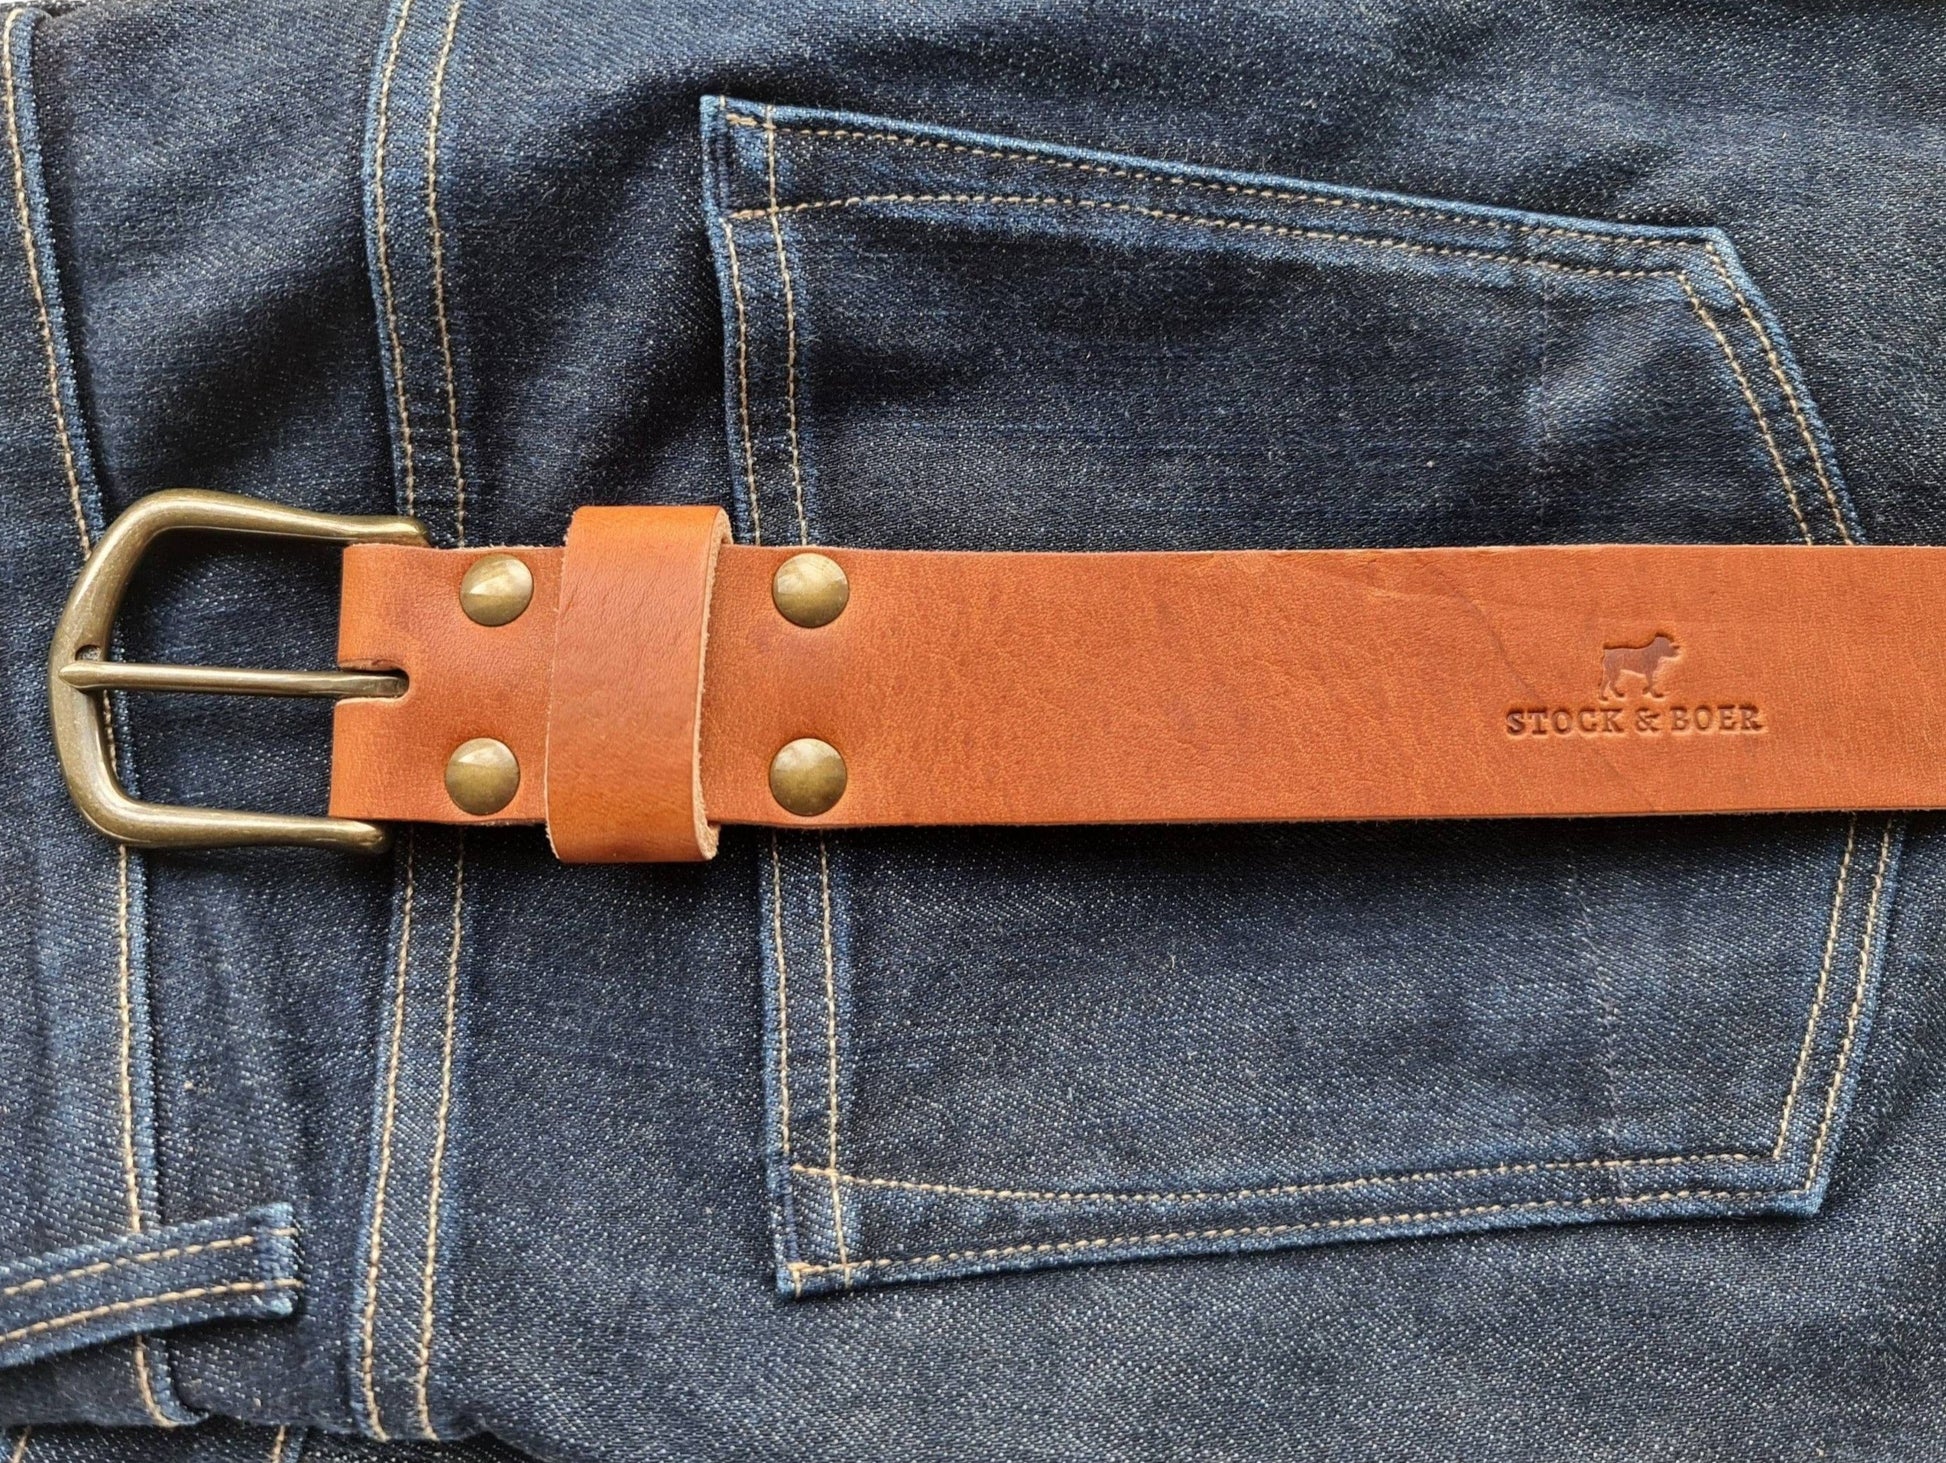 No. 8 Vaquero Full Grain Leather Belt, Horween English Tan Dublin Leather, Side on Jeans